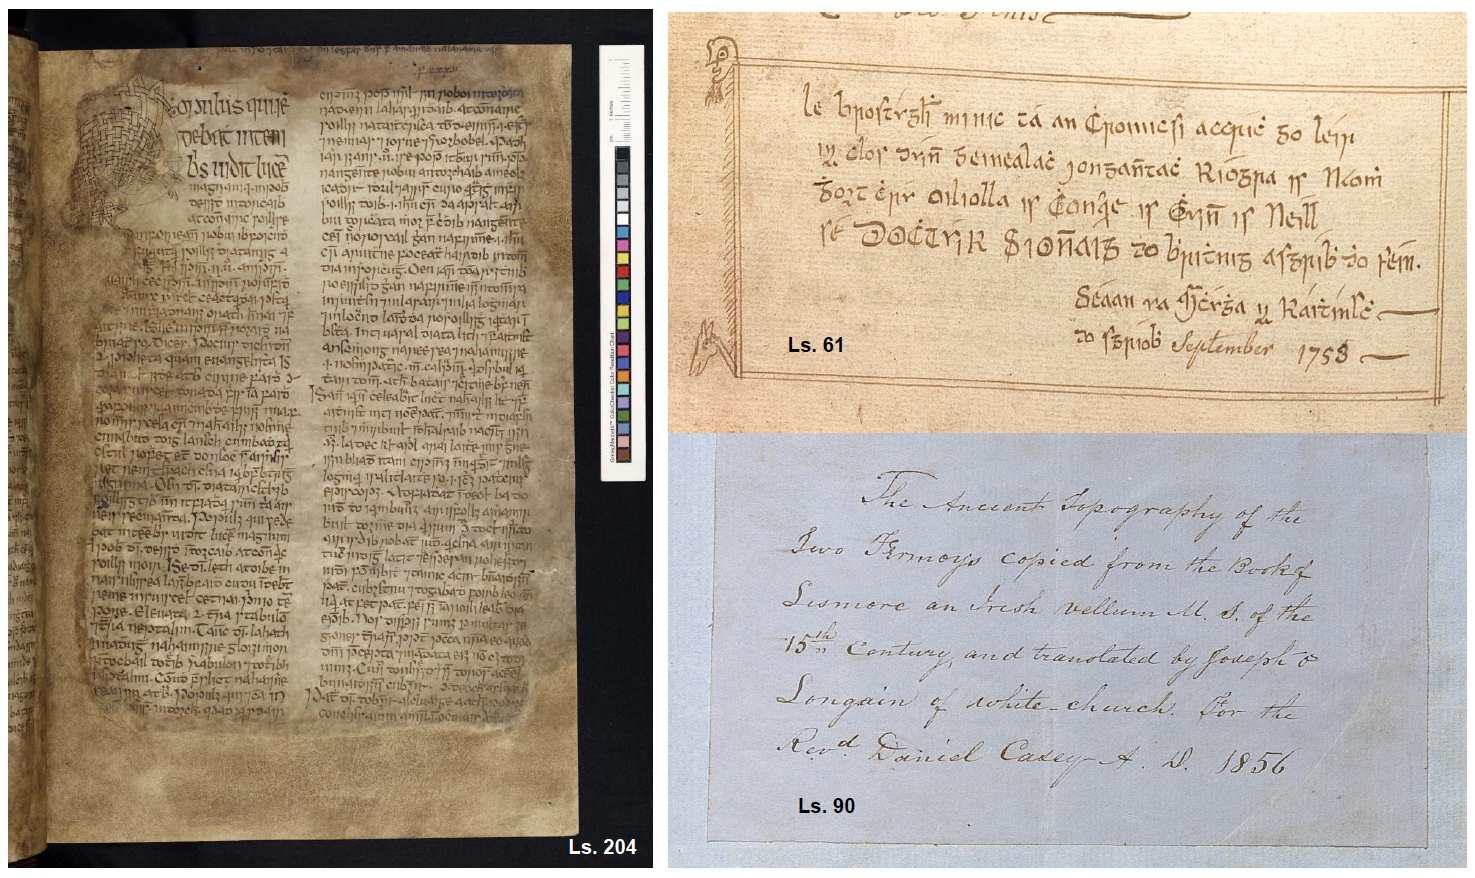 Three images: on the left is a folio from The Book of Lismore. This folio has a decorated letter on its top left. On the top right is a scribal signature from 1753. On the lower right is a title page indicating the date was 1856.